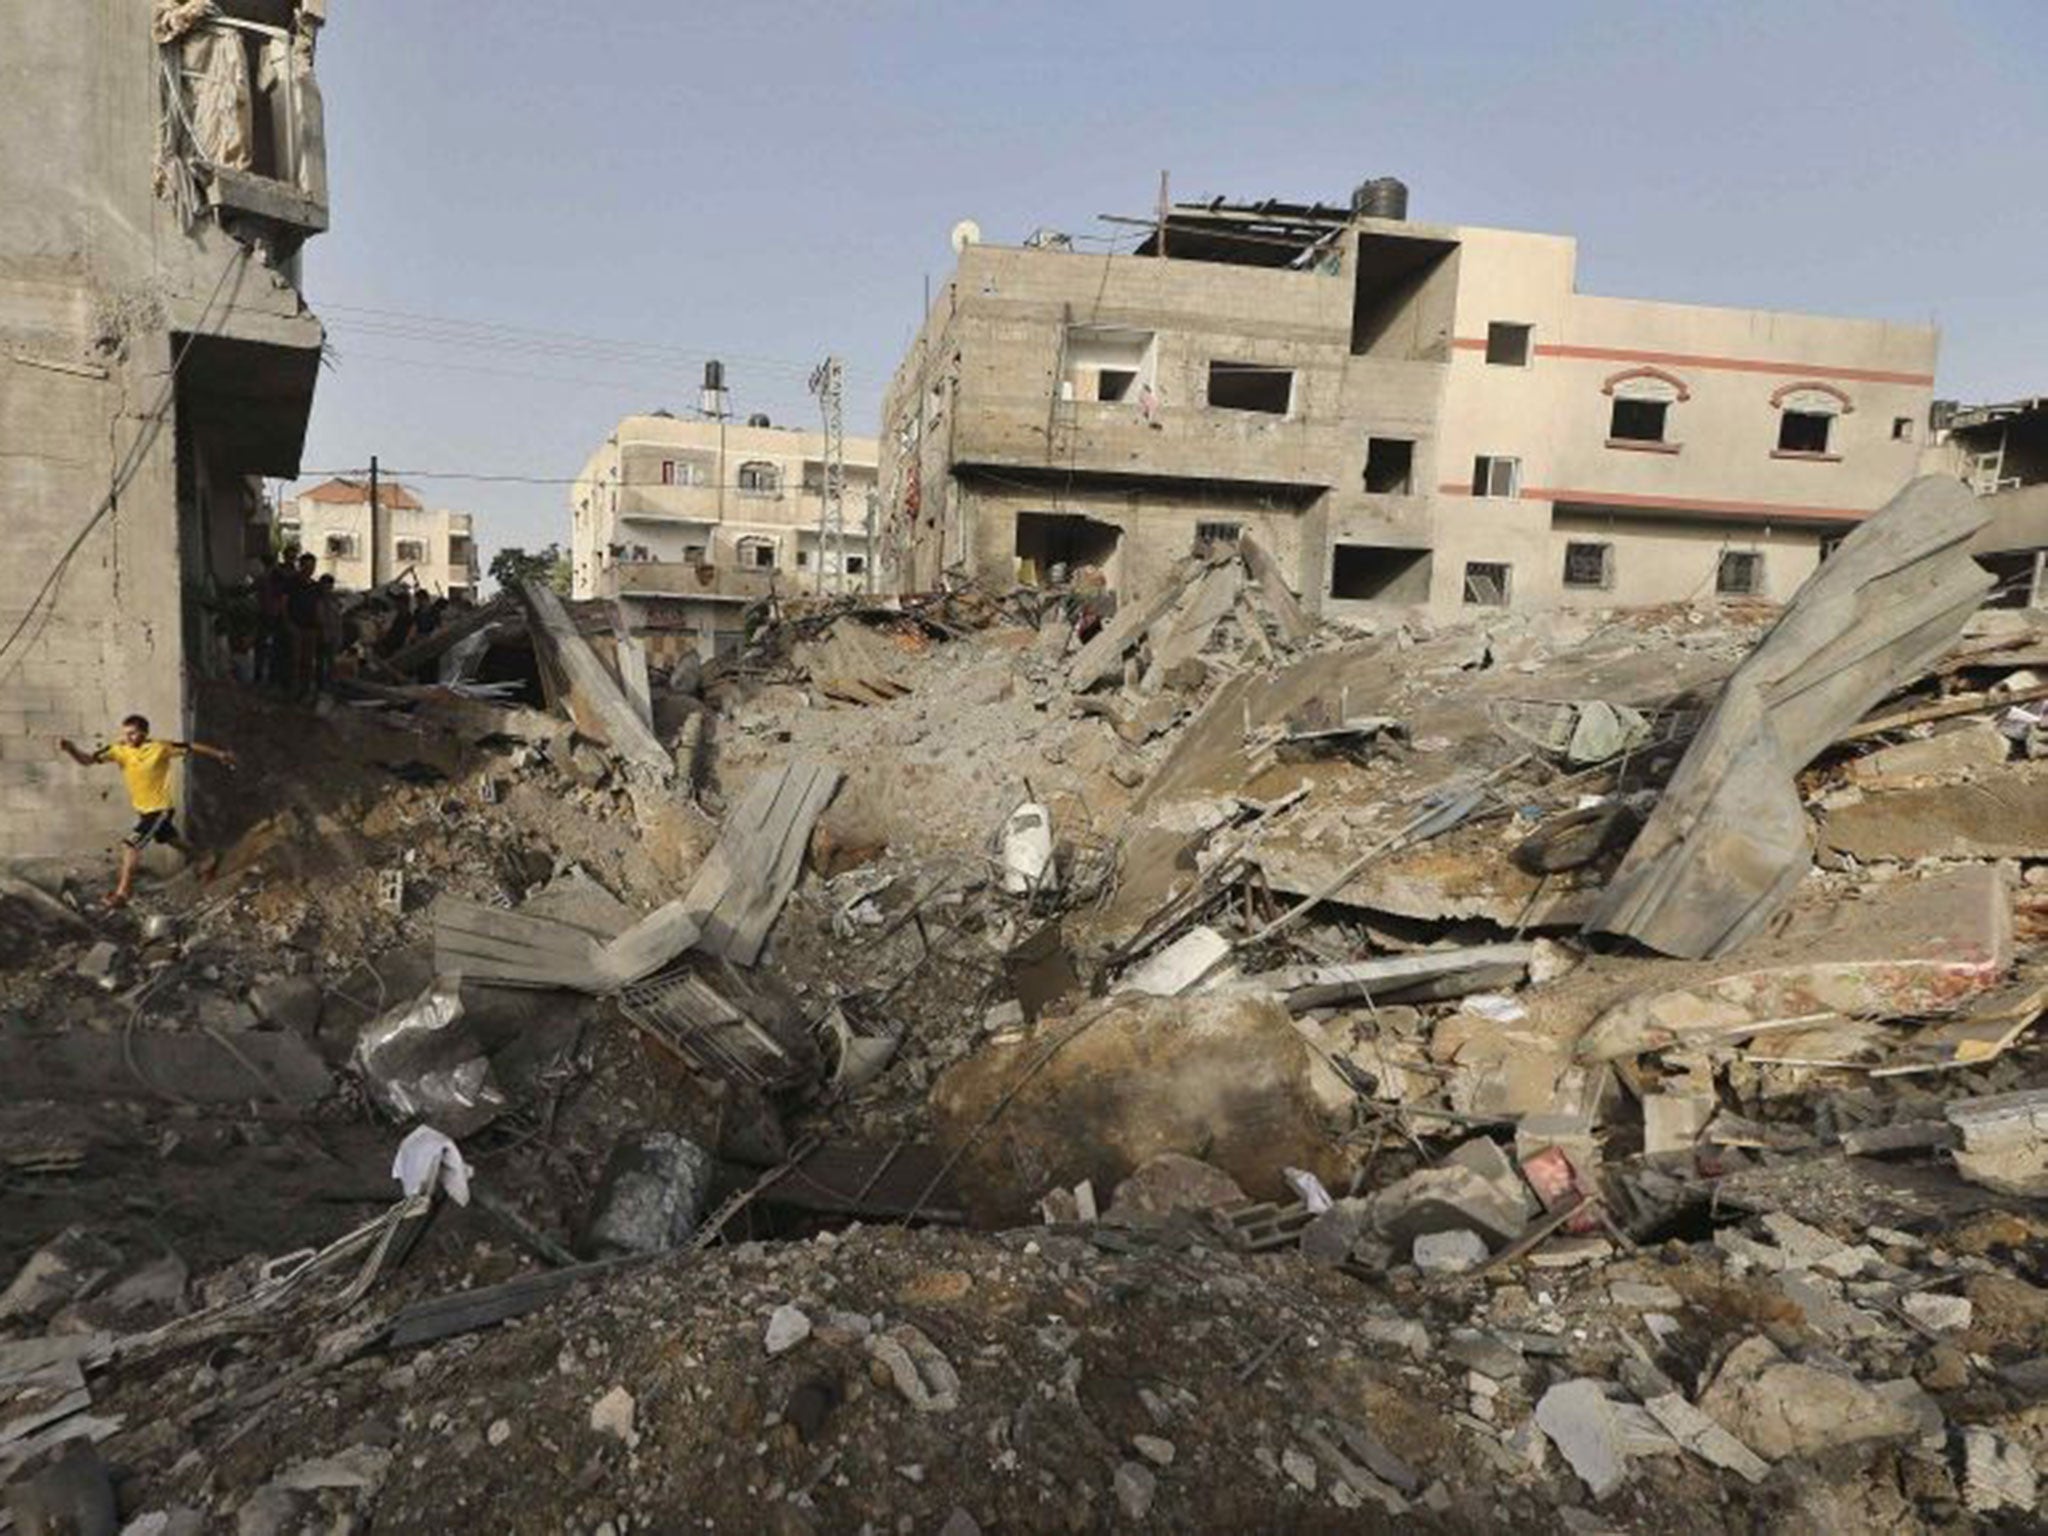 A Palestinian man walks amidst the rubble of a house which police said was destroyed in an Israeli air strike in the northern Gaza Strip July 12, 2014.